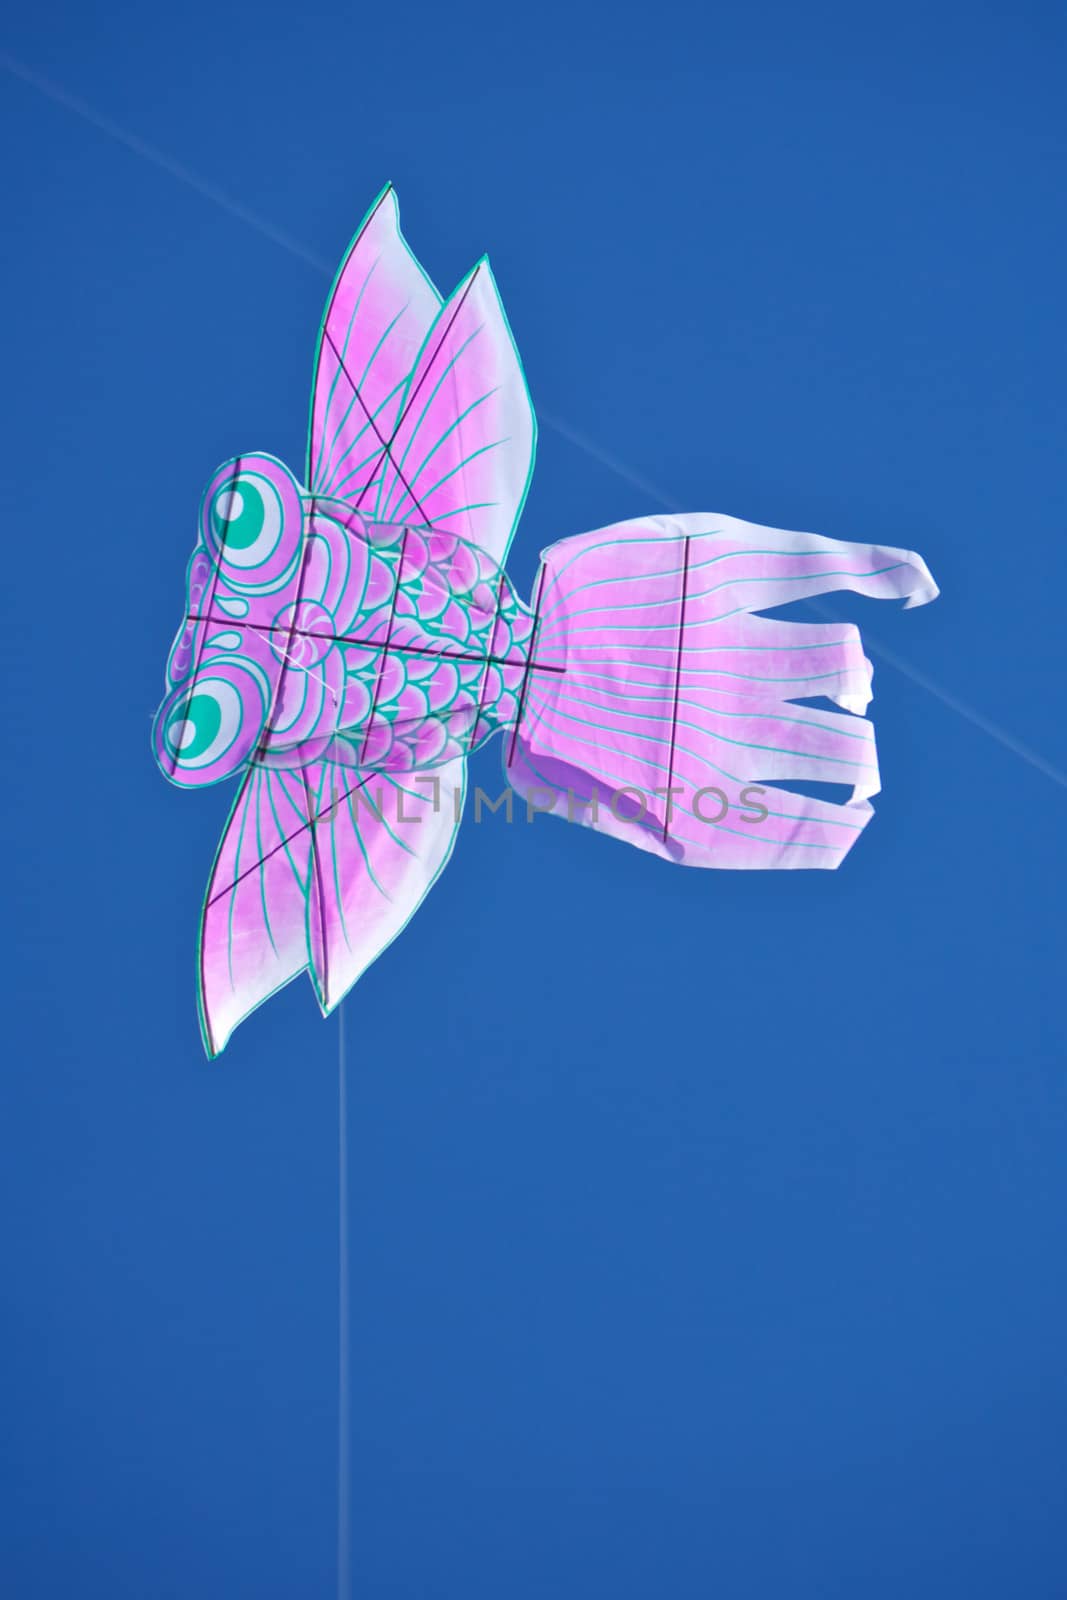 A flying kite in the sky